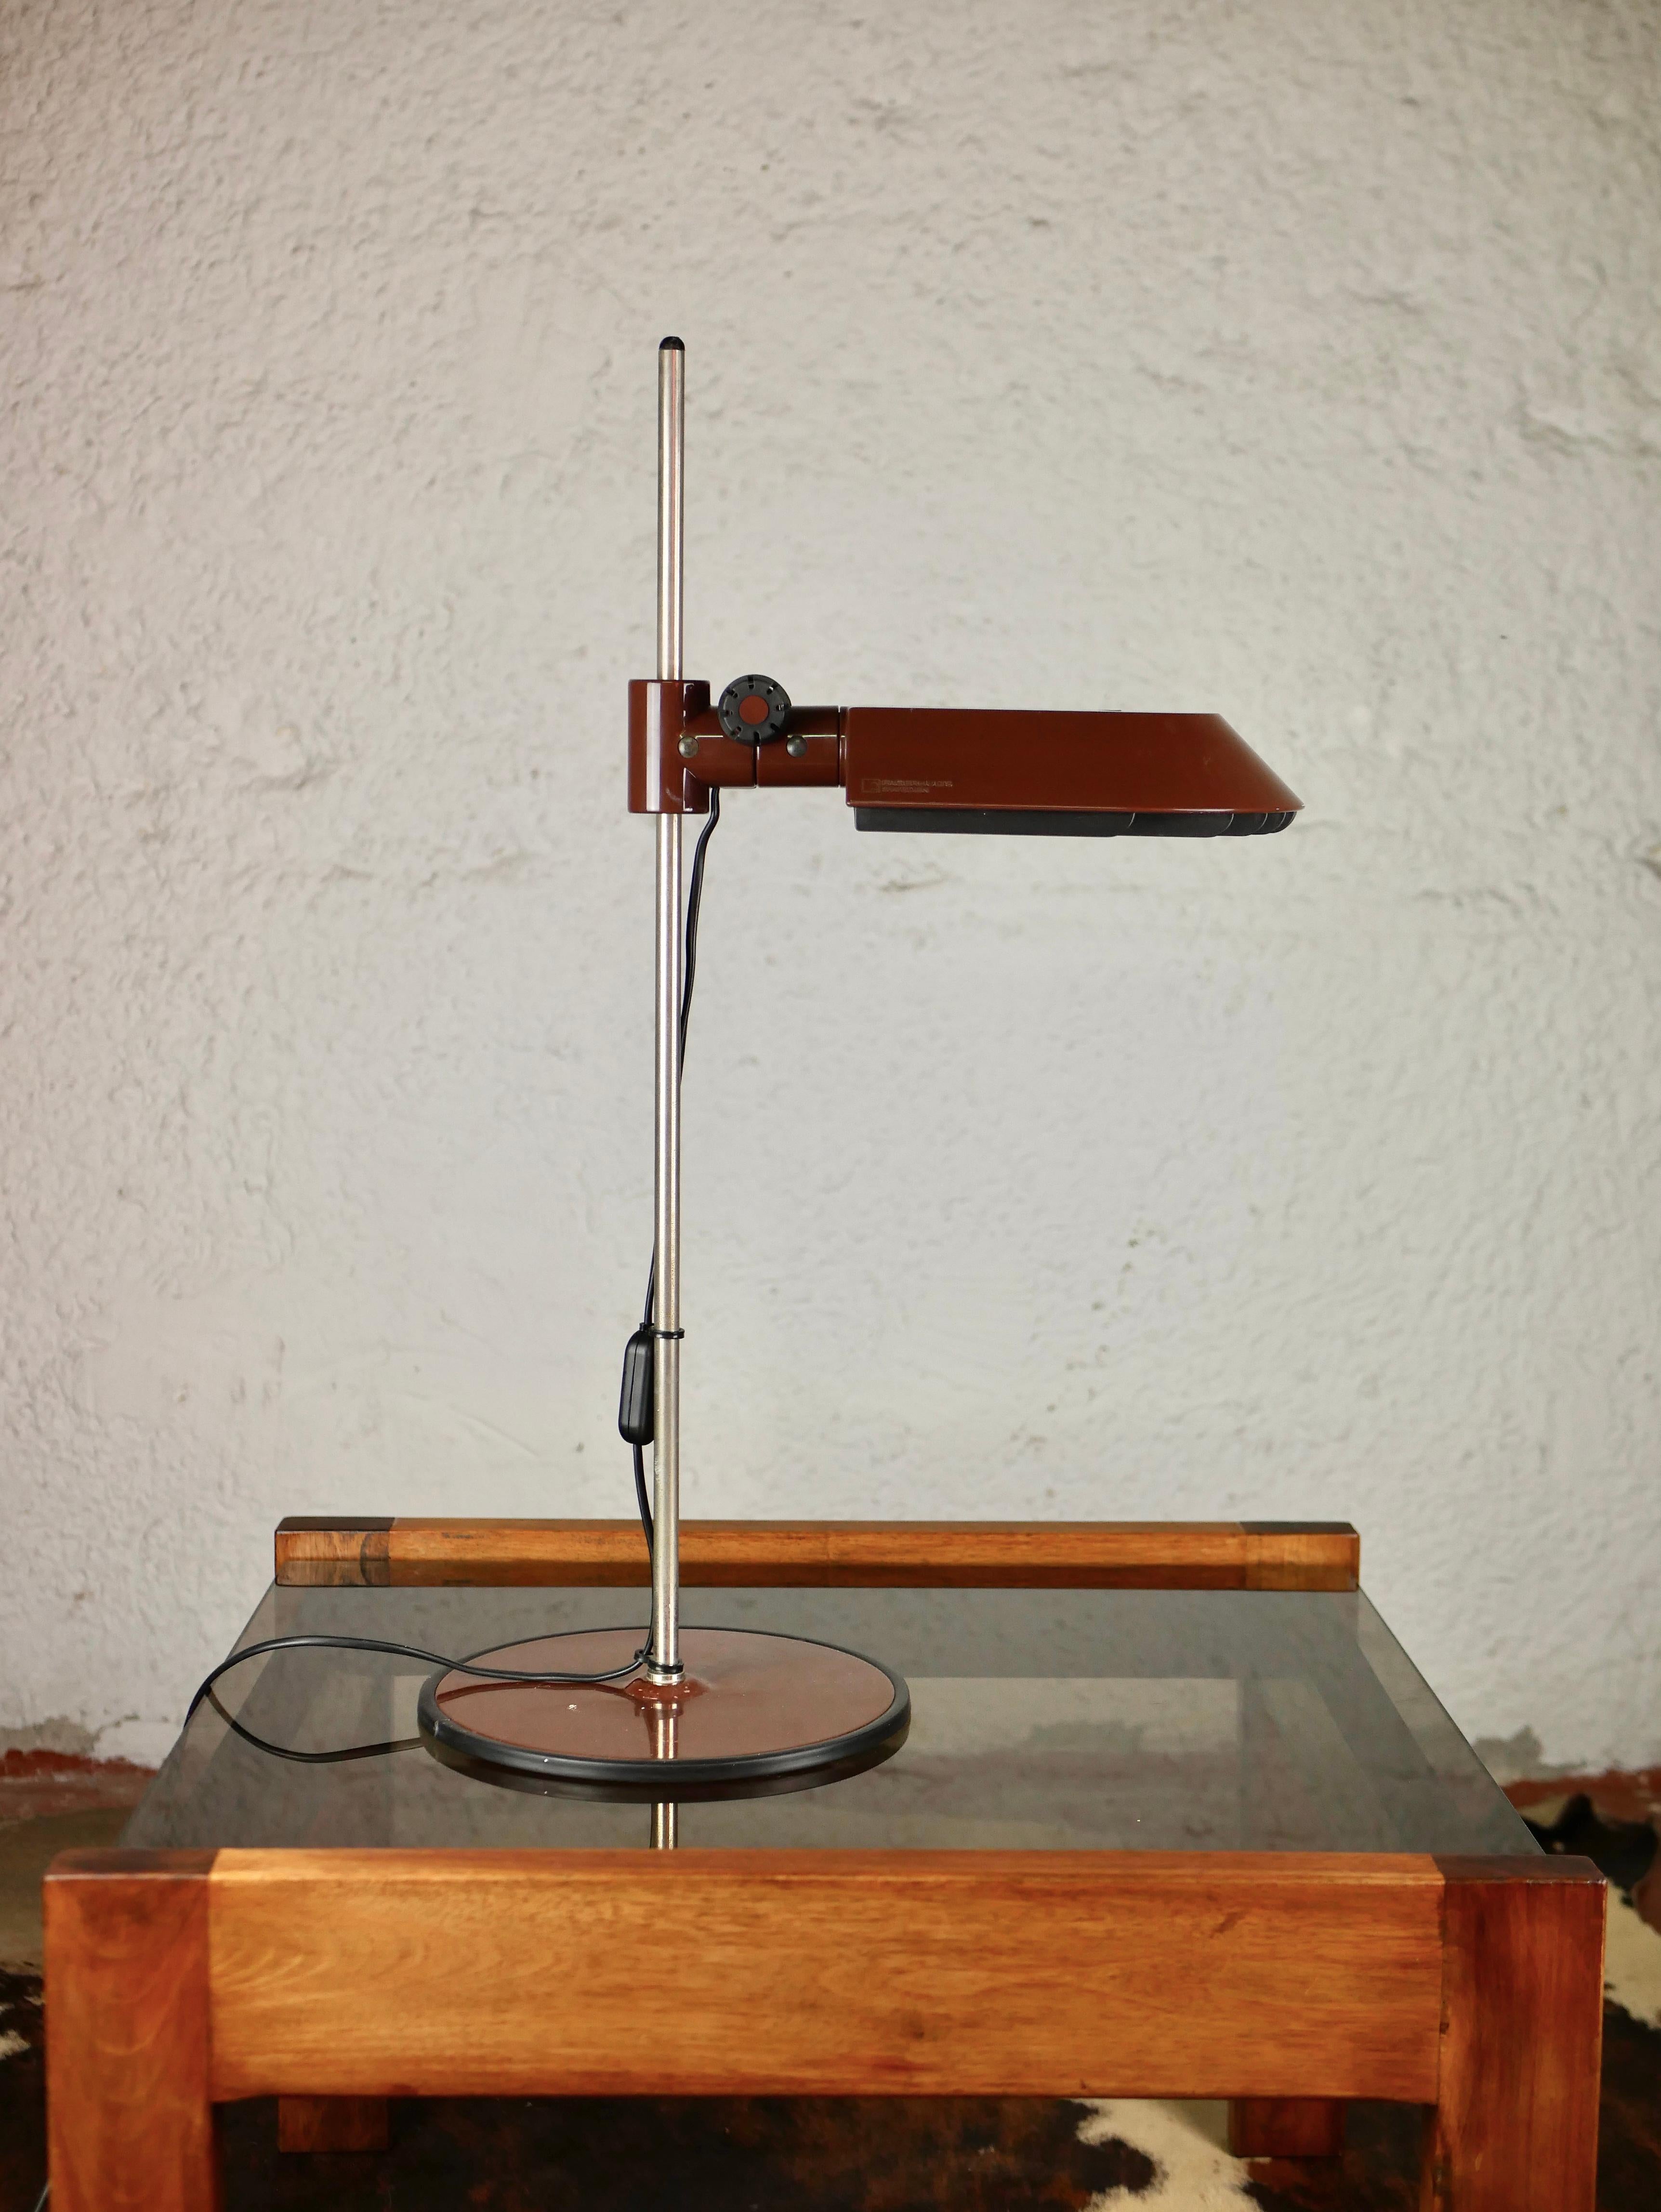 Nice office lamp for hardworkers !
Brown office lamp, adjustable, made in Sweden by Fagerhultz in the 1970s.
Overall good condition, few scratches especially on base.